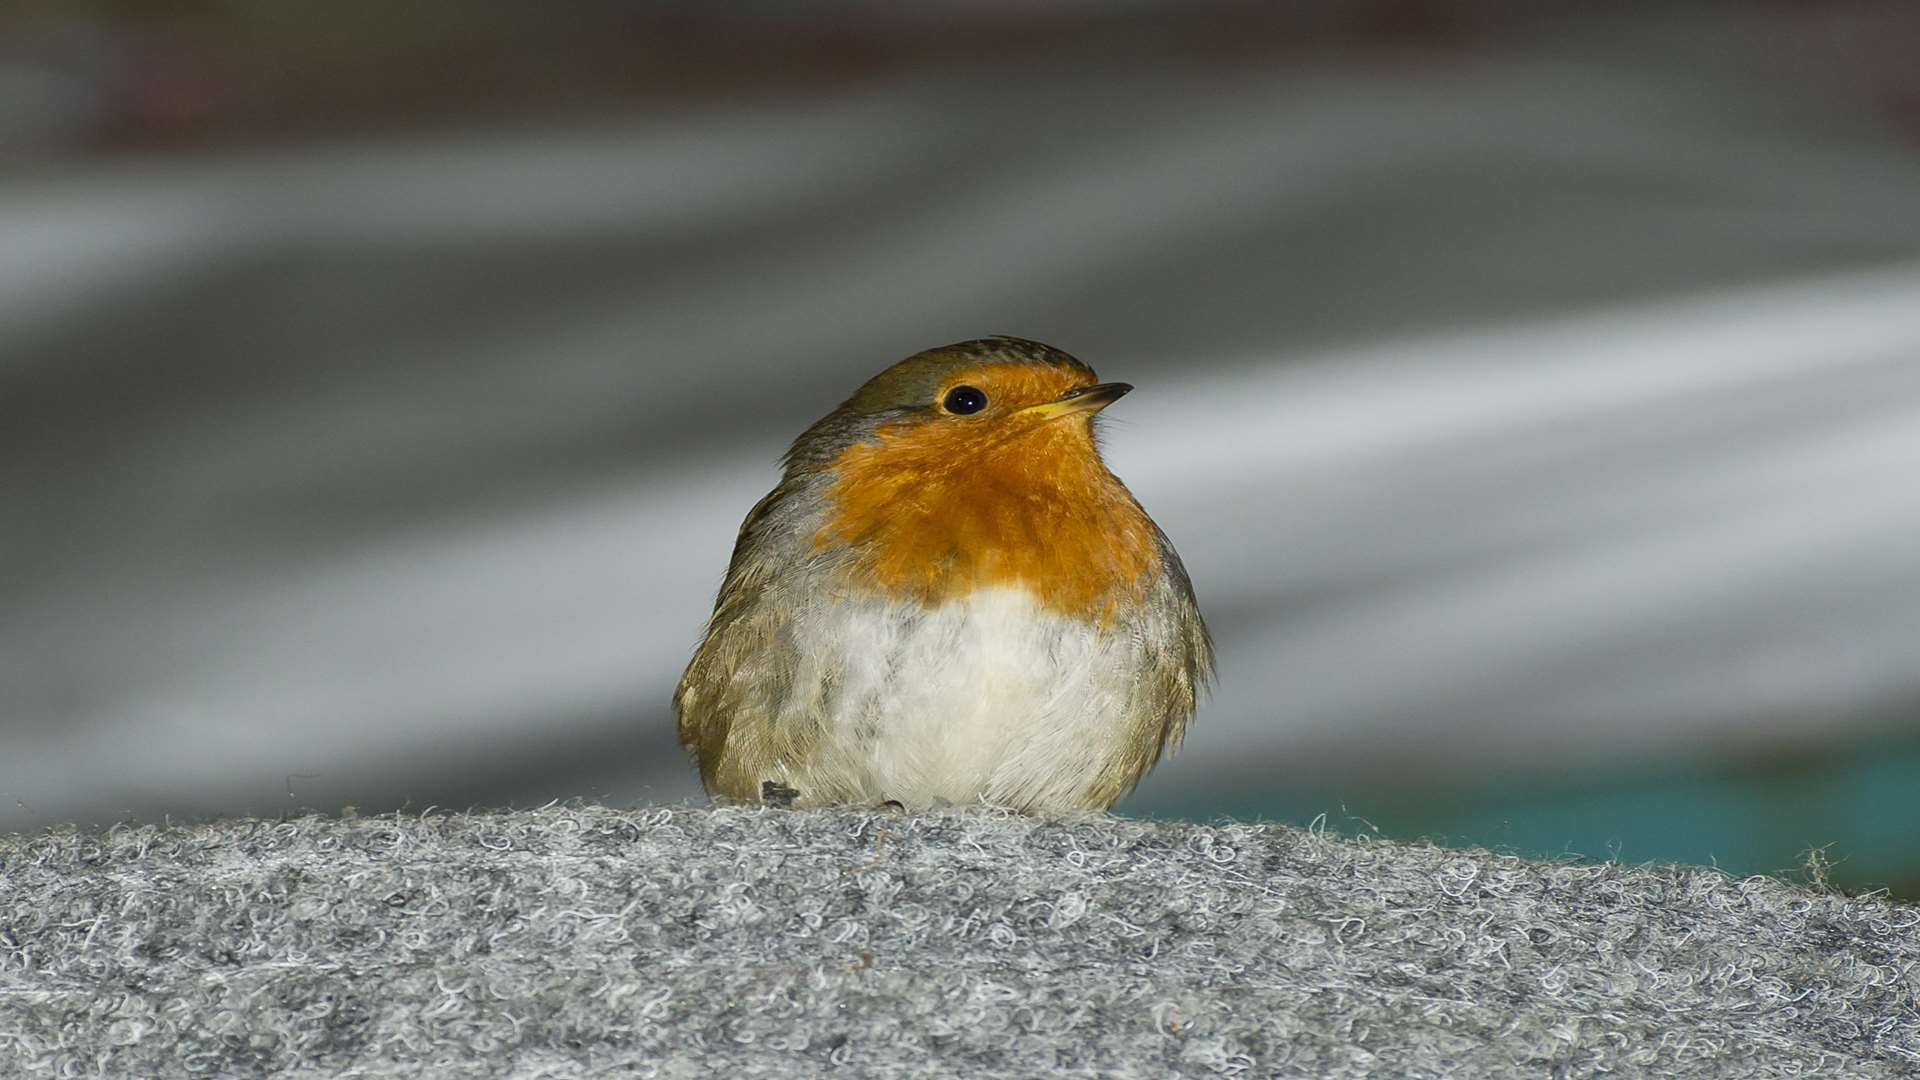 The robin perched on another carpet roll